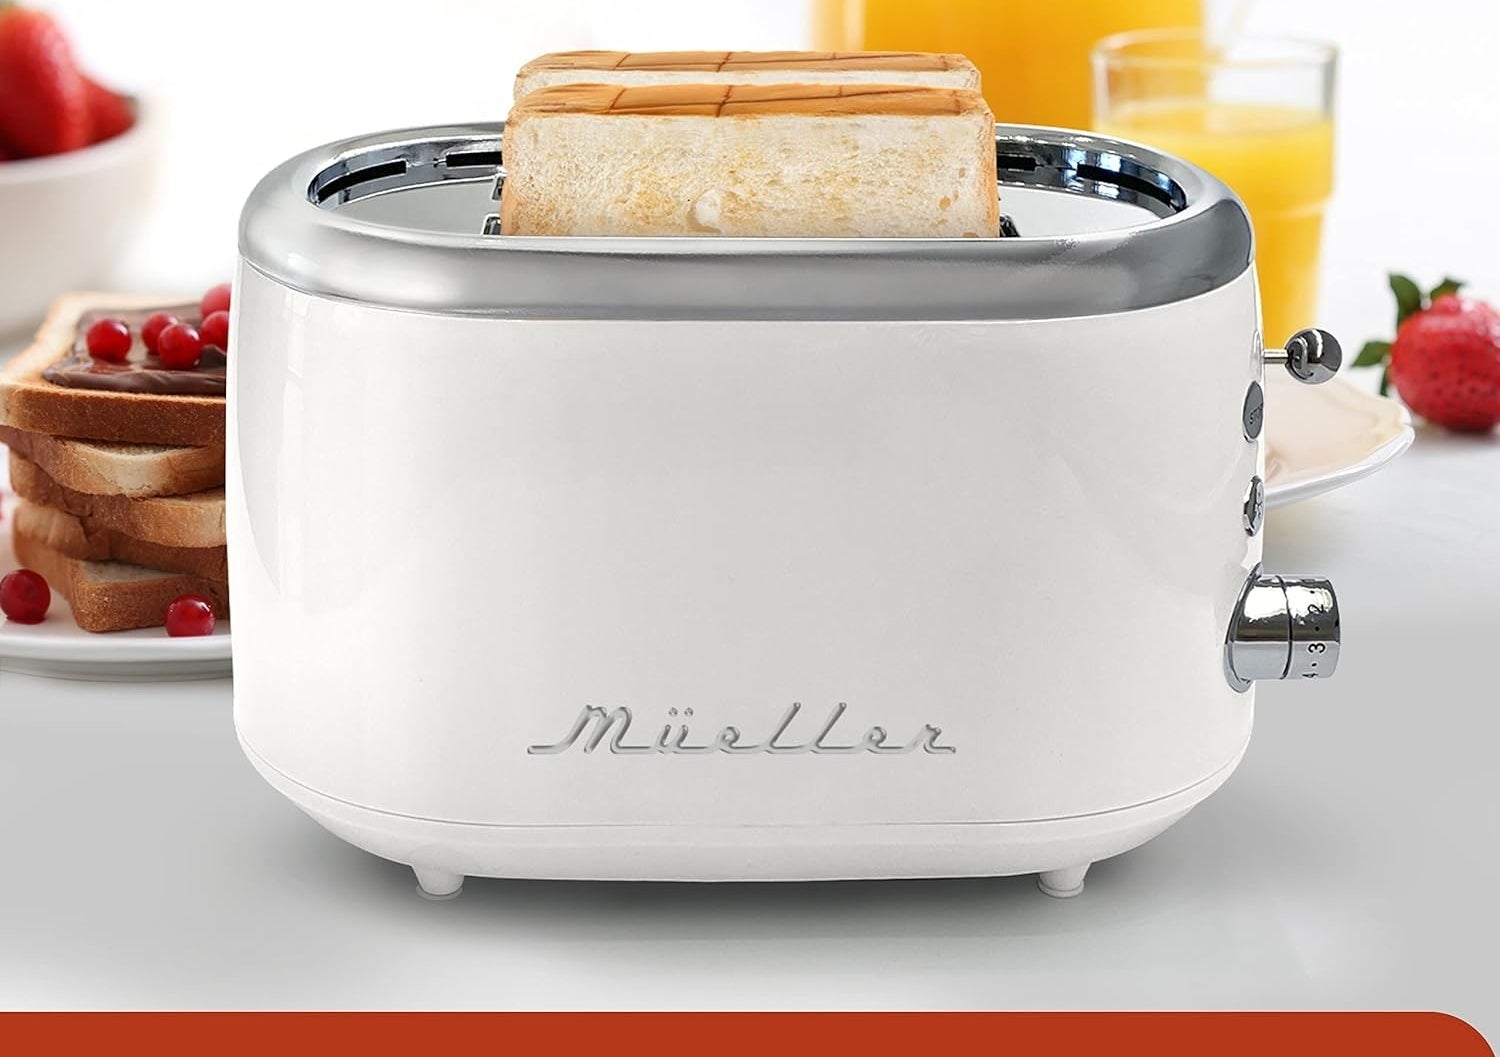 Retro-style toaster in white with bread inside